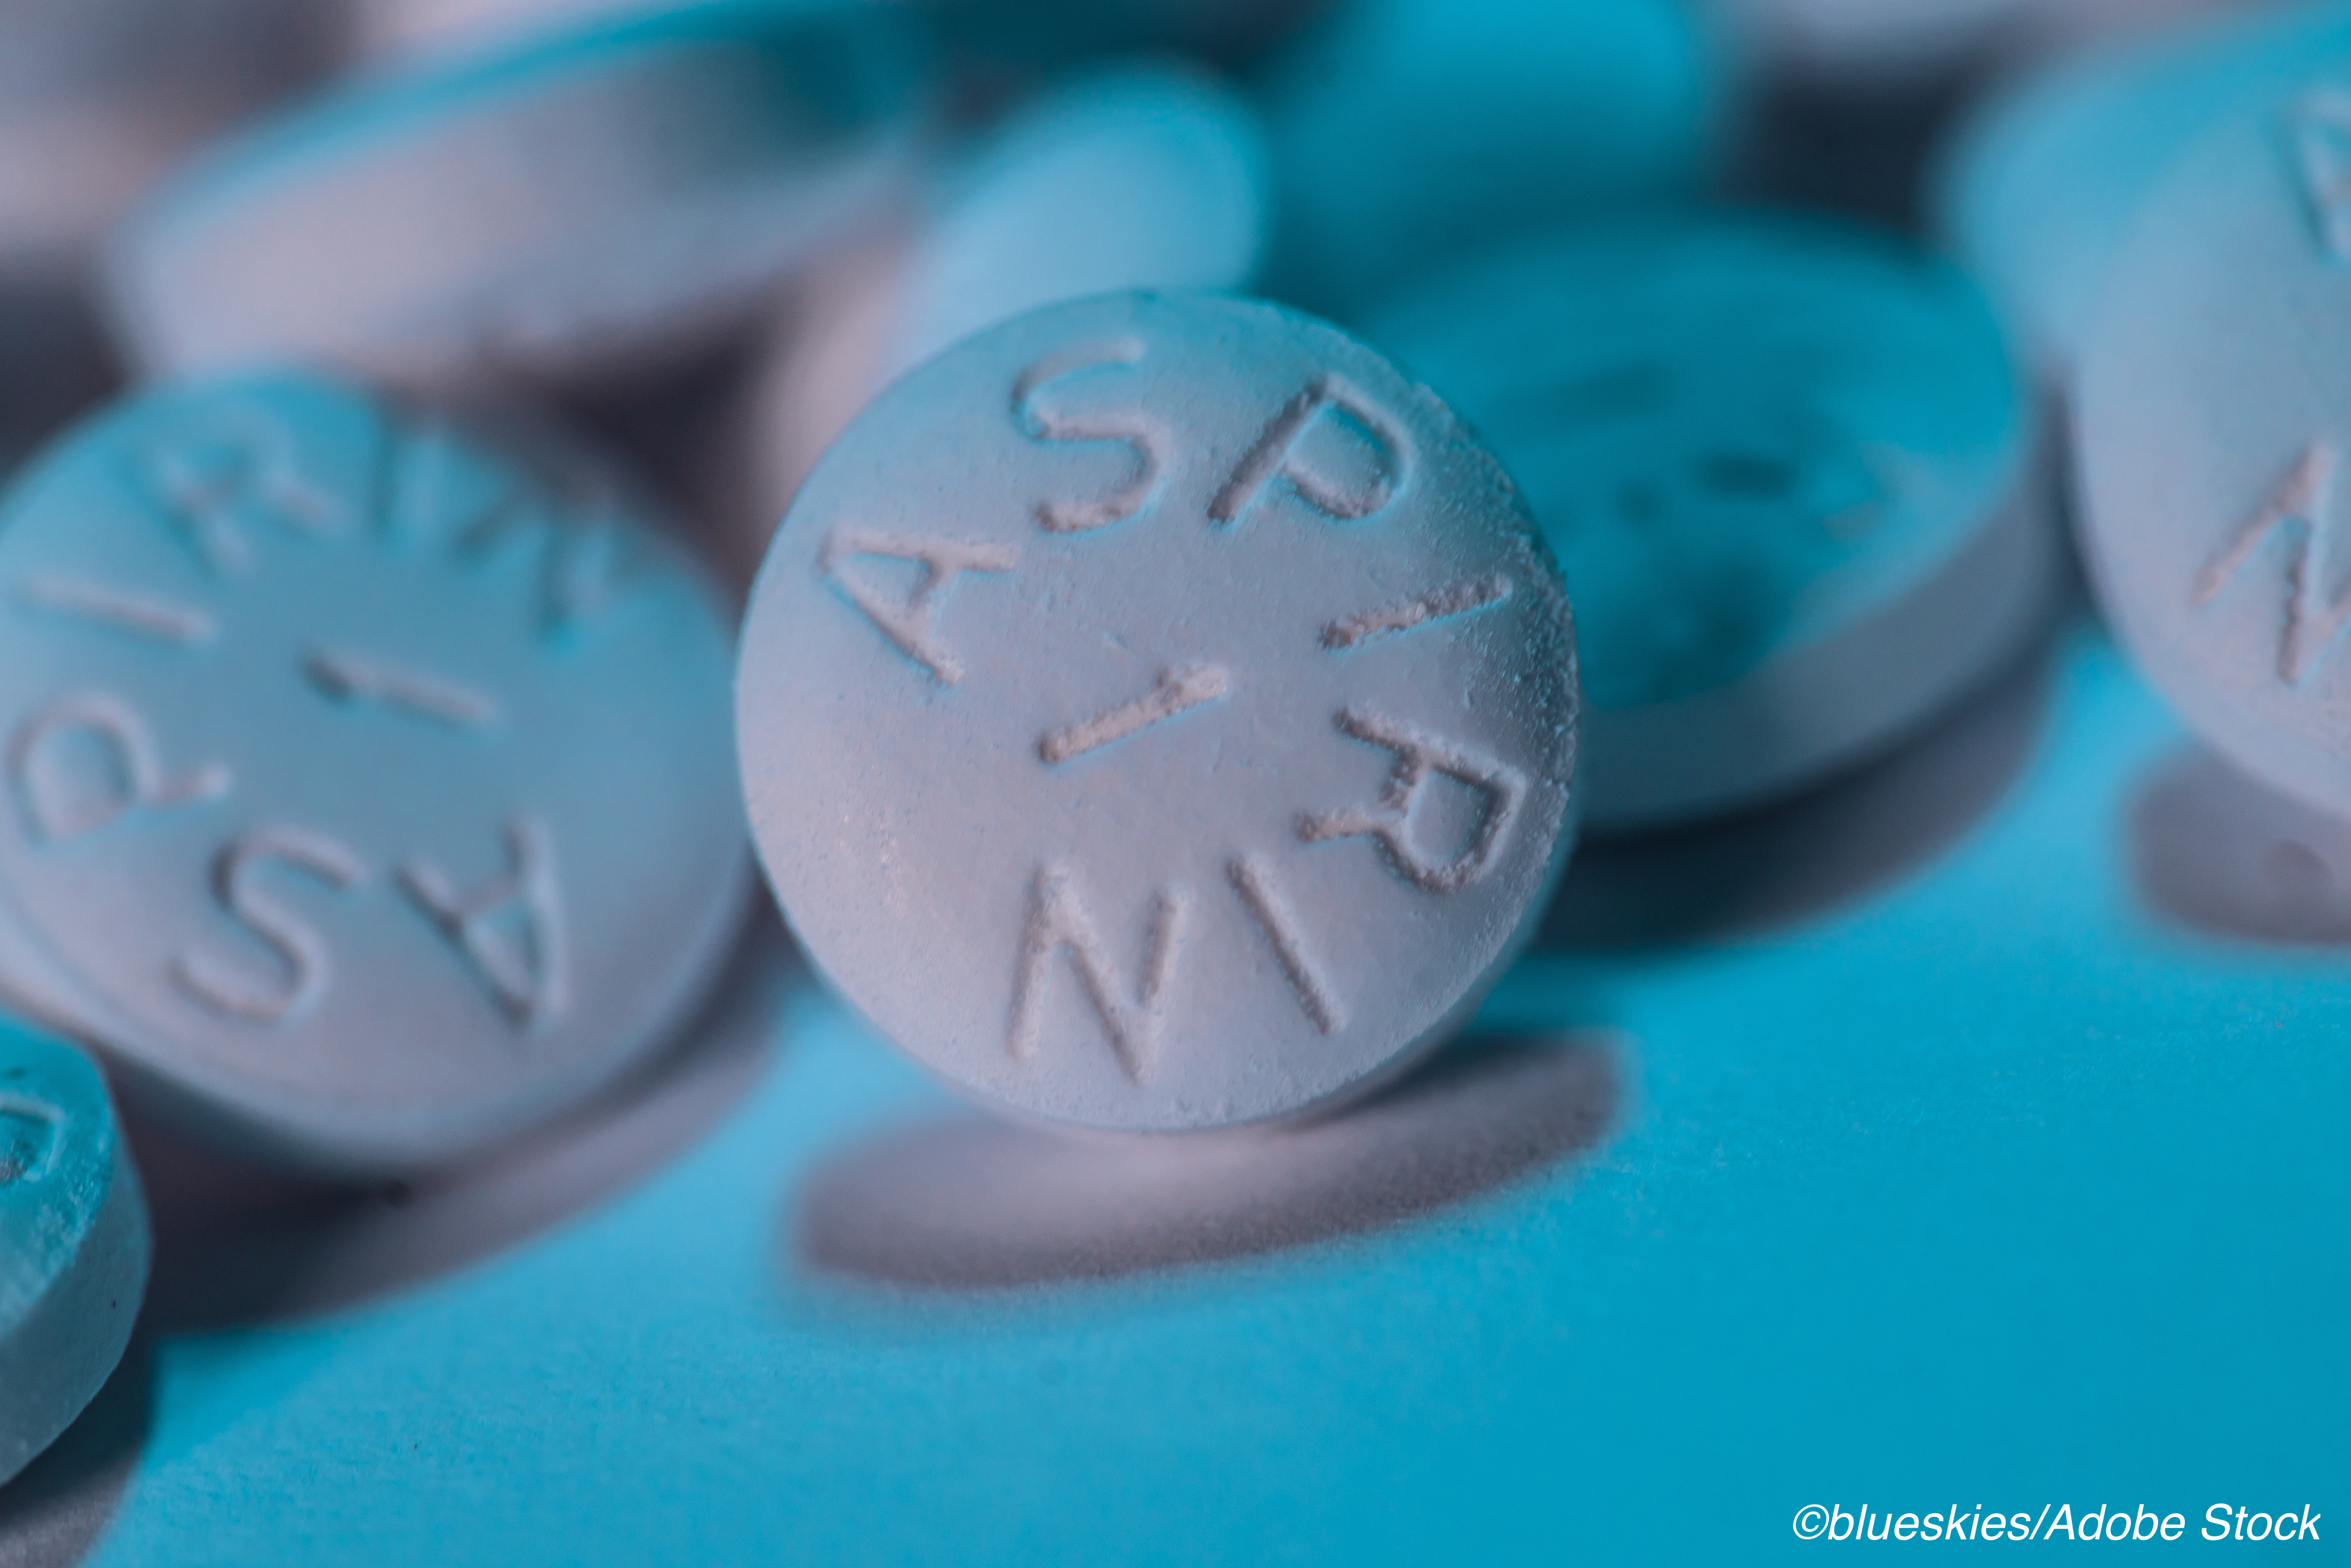 ACAAI: Delaying Aspirin Not Associated with Worse Outcomes Following ACS